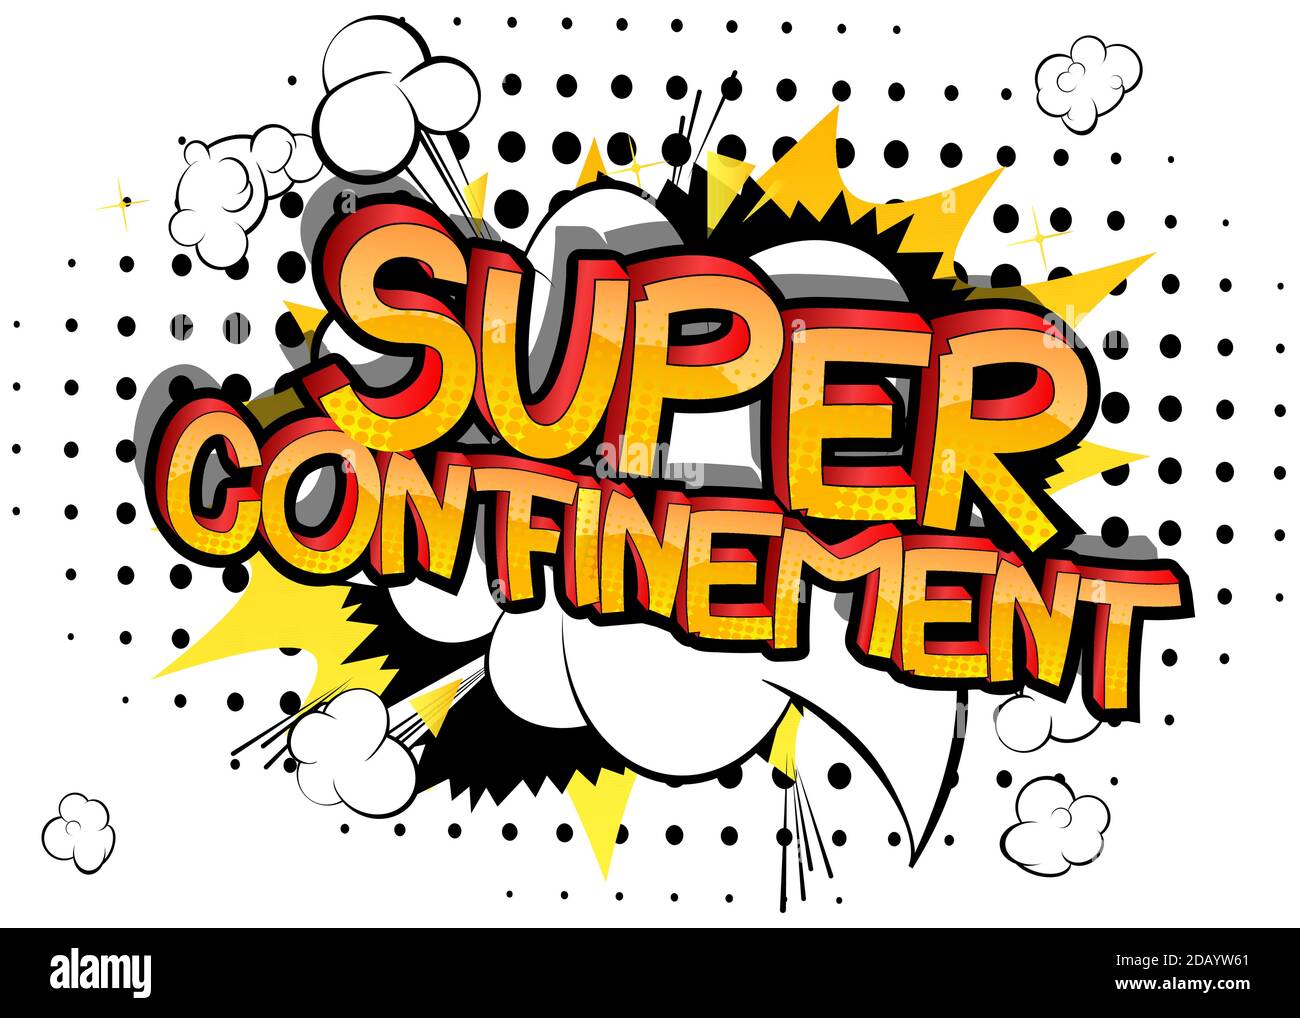 Super Confinement. Comic book style cartoon words on abstract colorful comics background. Stock Vector